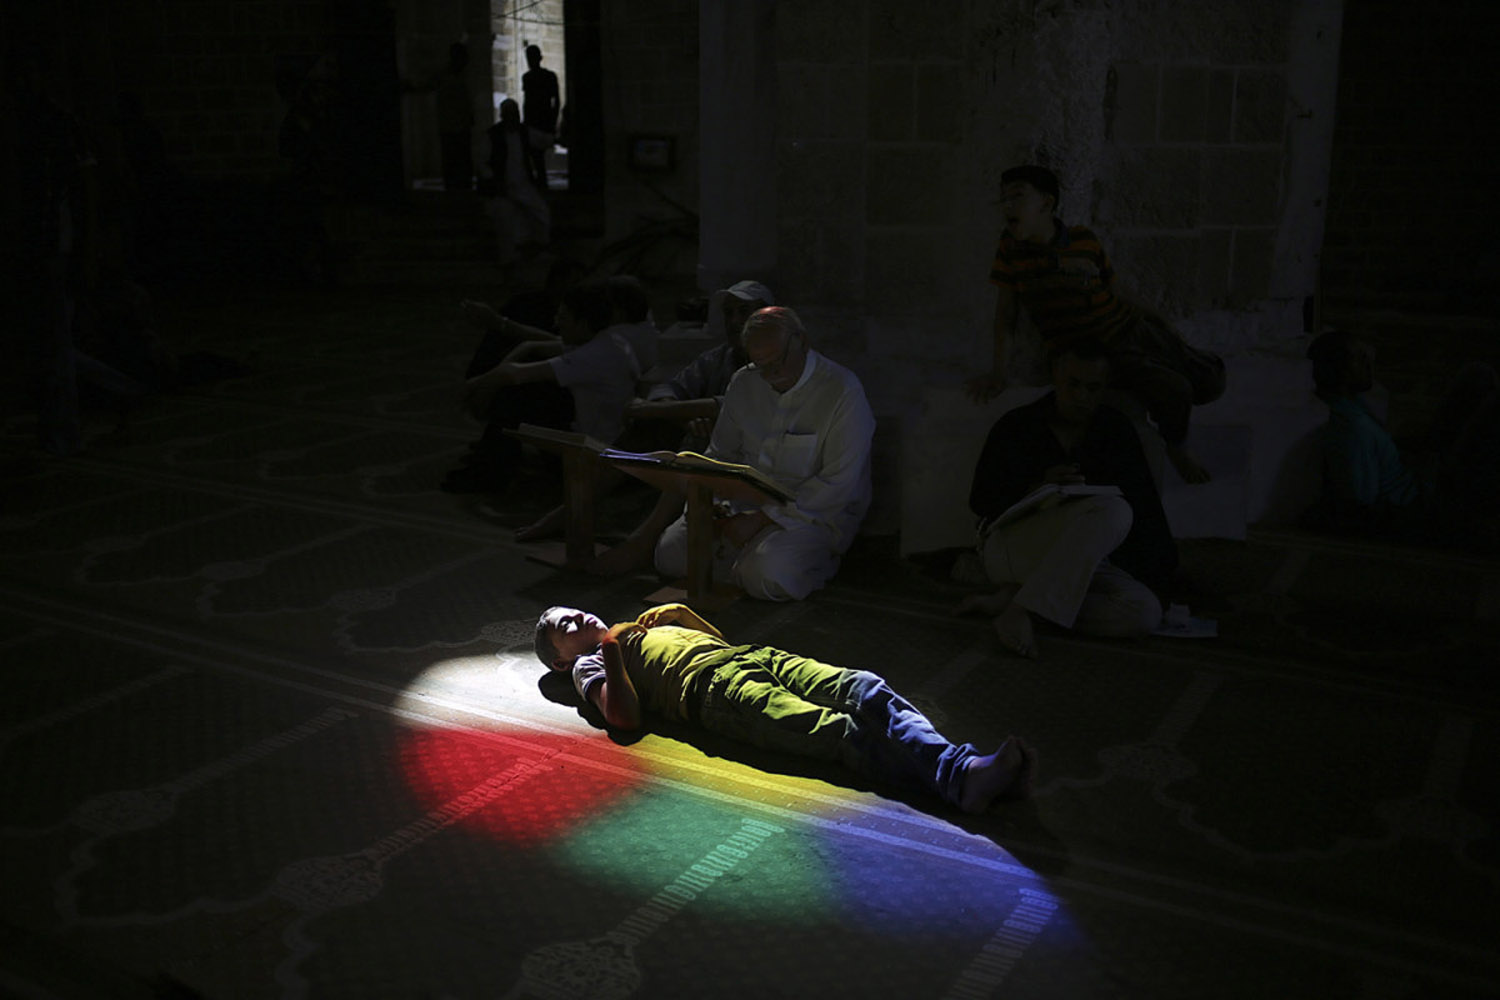 July 11, 2013. A Palestinian child rests as others pray and read the Koran in a mosque during the holy month of Ramadan, in Gaza City, Gaza Strip.